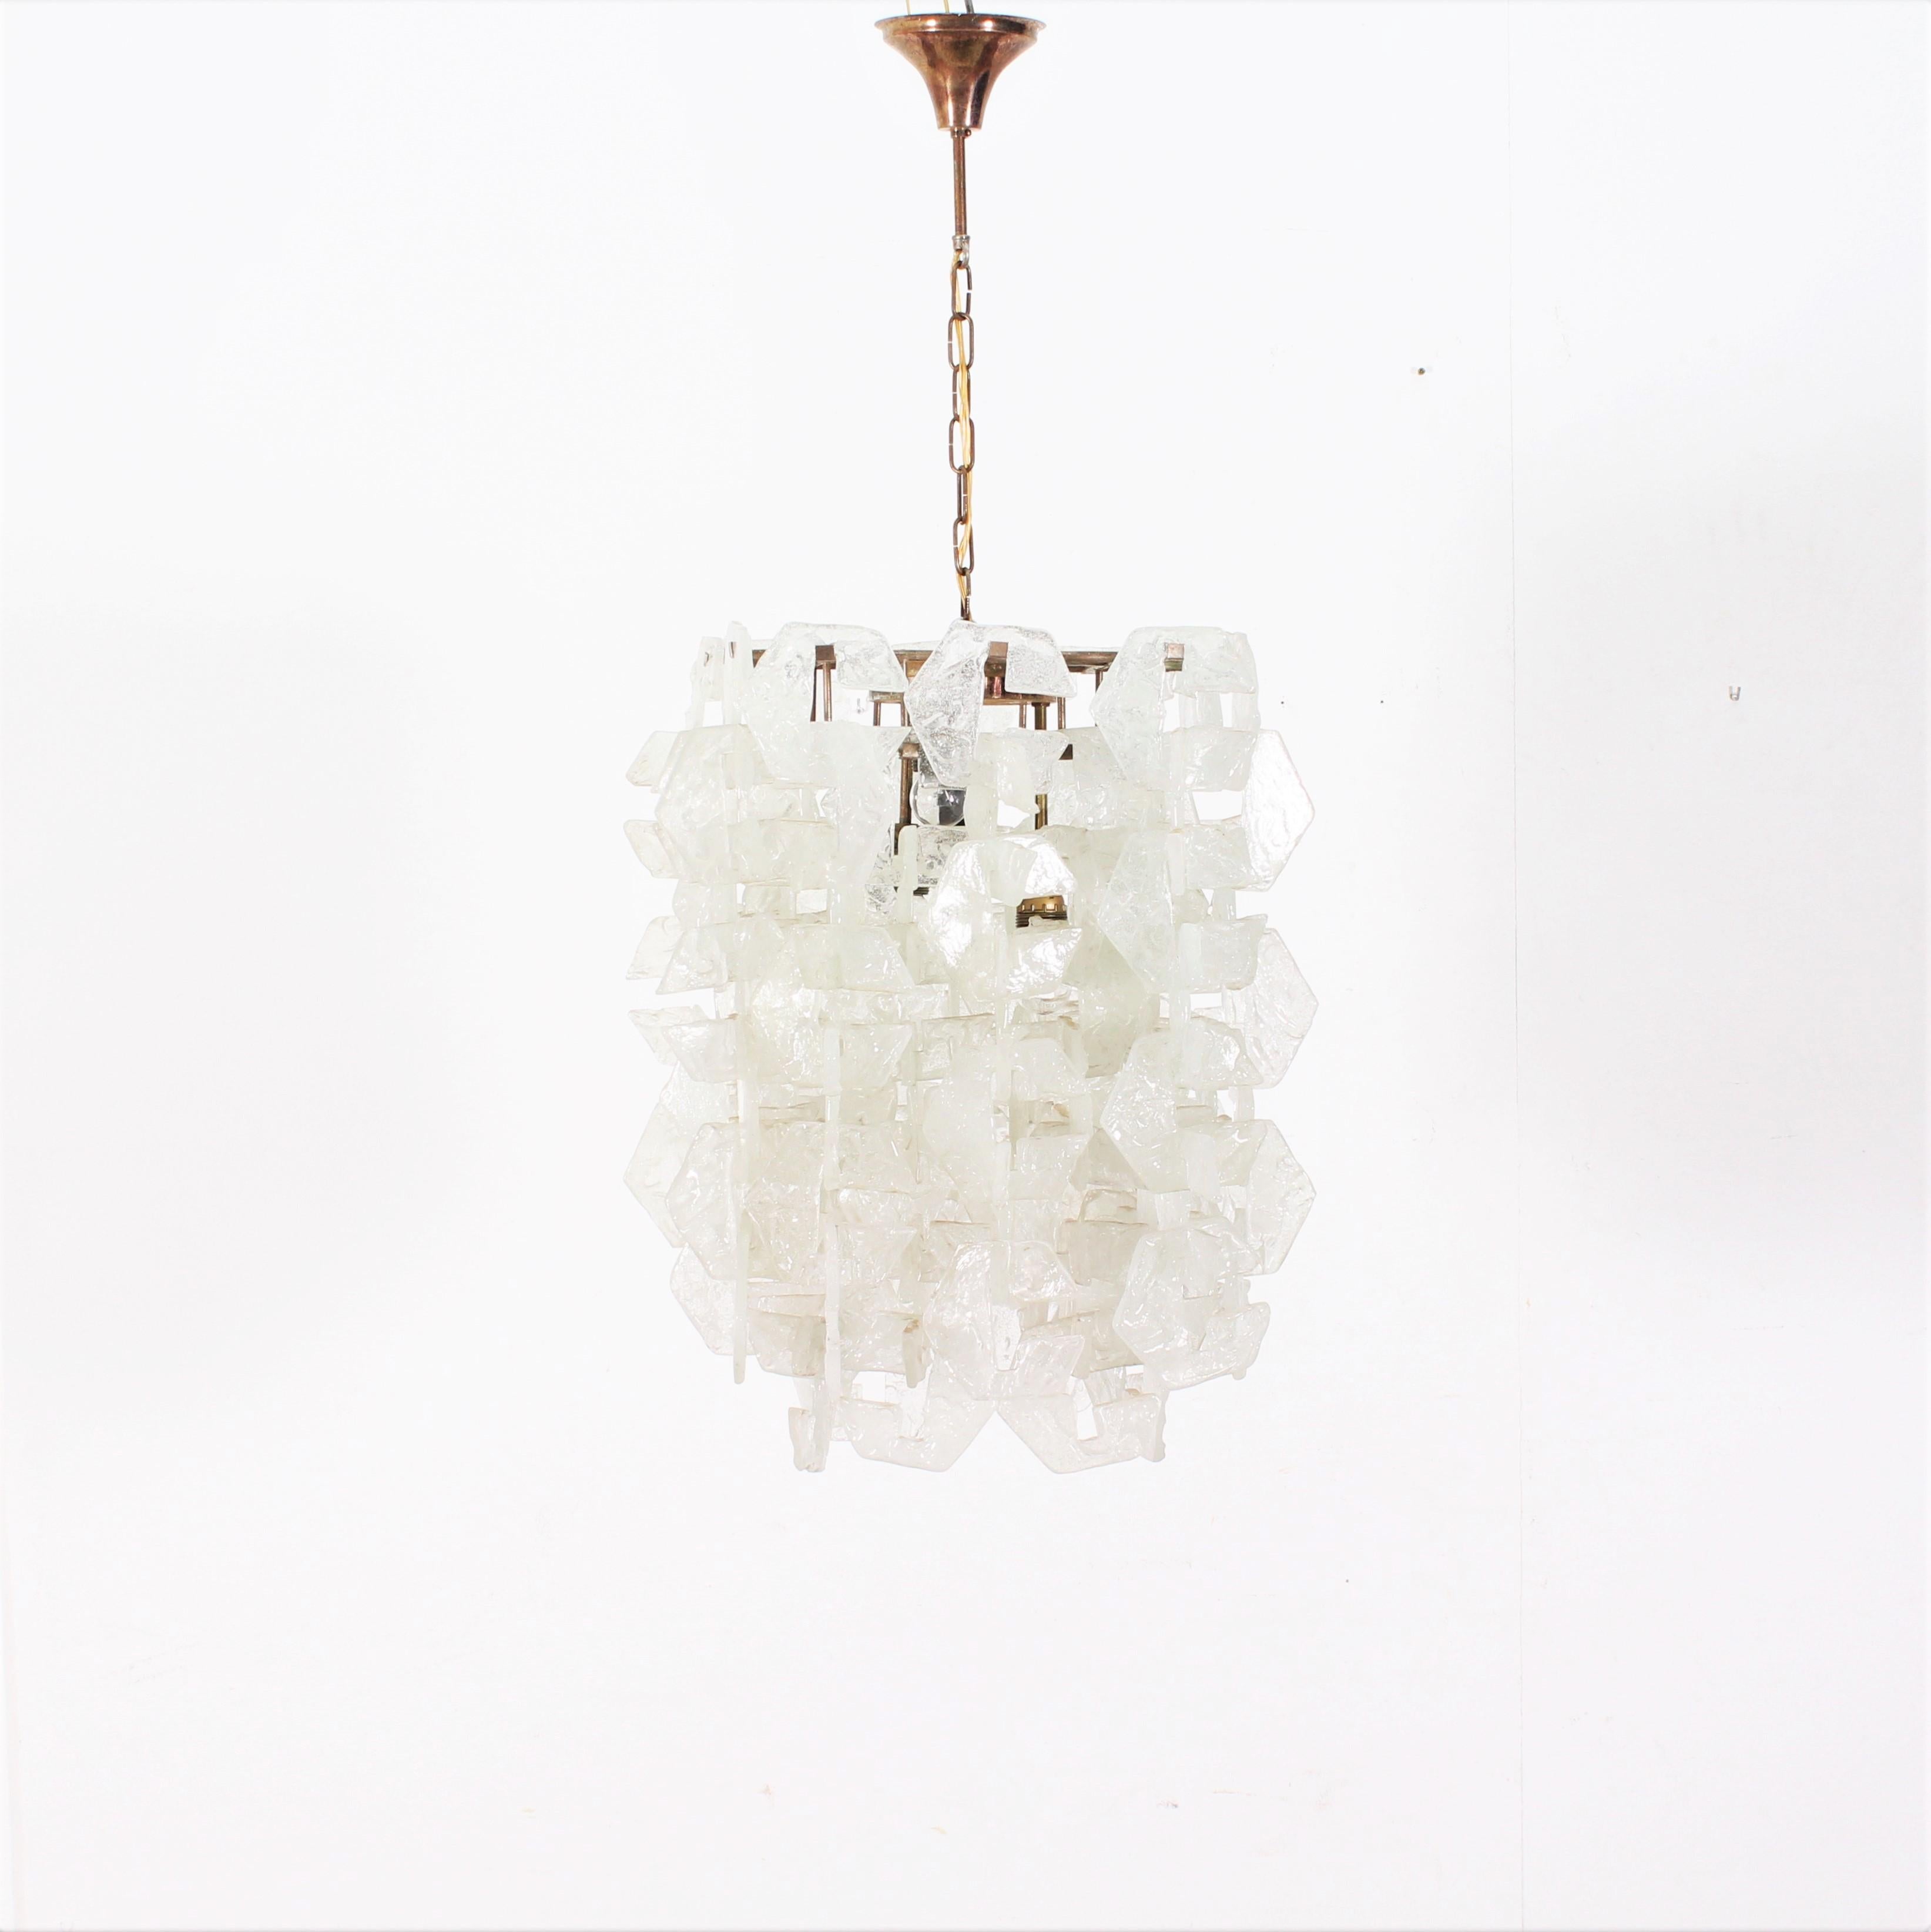 Amazing drop chandelier by Carlo Nason for Mazzega 1960s Italy, with a square-shaped steel structure, with flat hexagonal C-shaped rings in Murano glass interlocking with each other. Four light points at staggered heights with E27 lamp base.
Wear